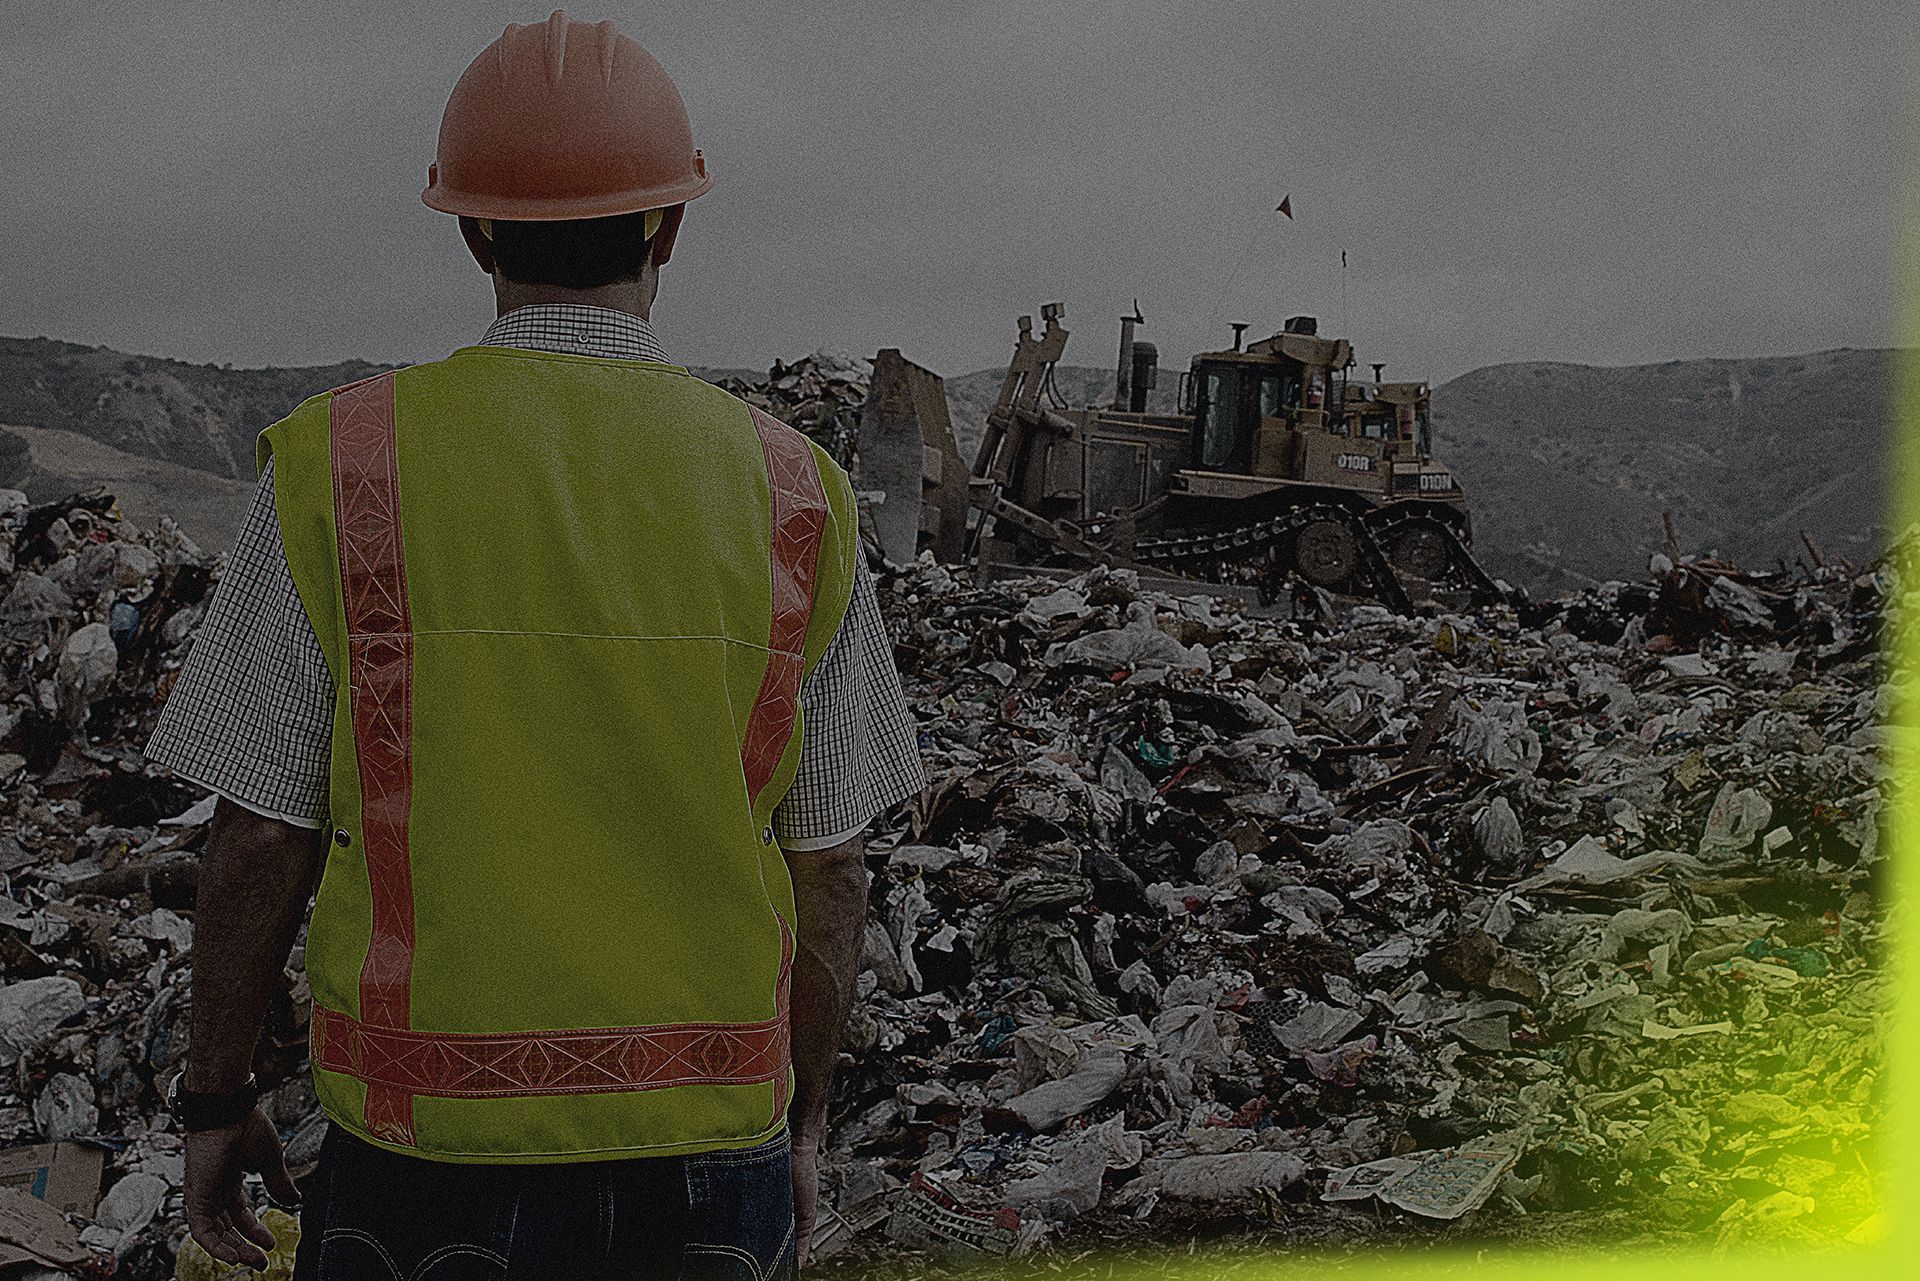 A man wearing a hard hat and safety vest is standing in front of a pile of trash.